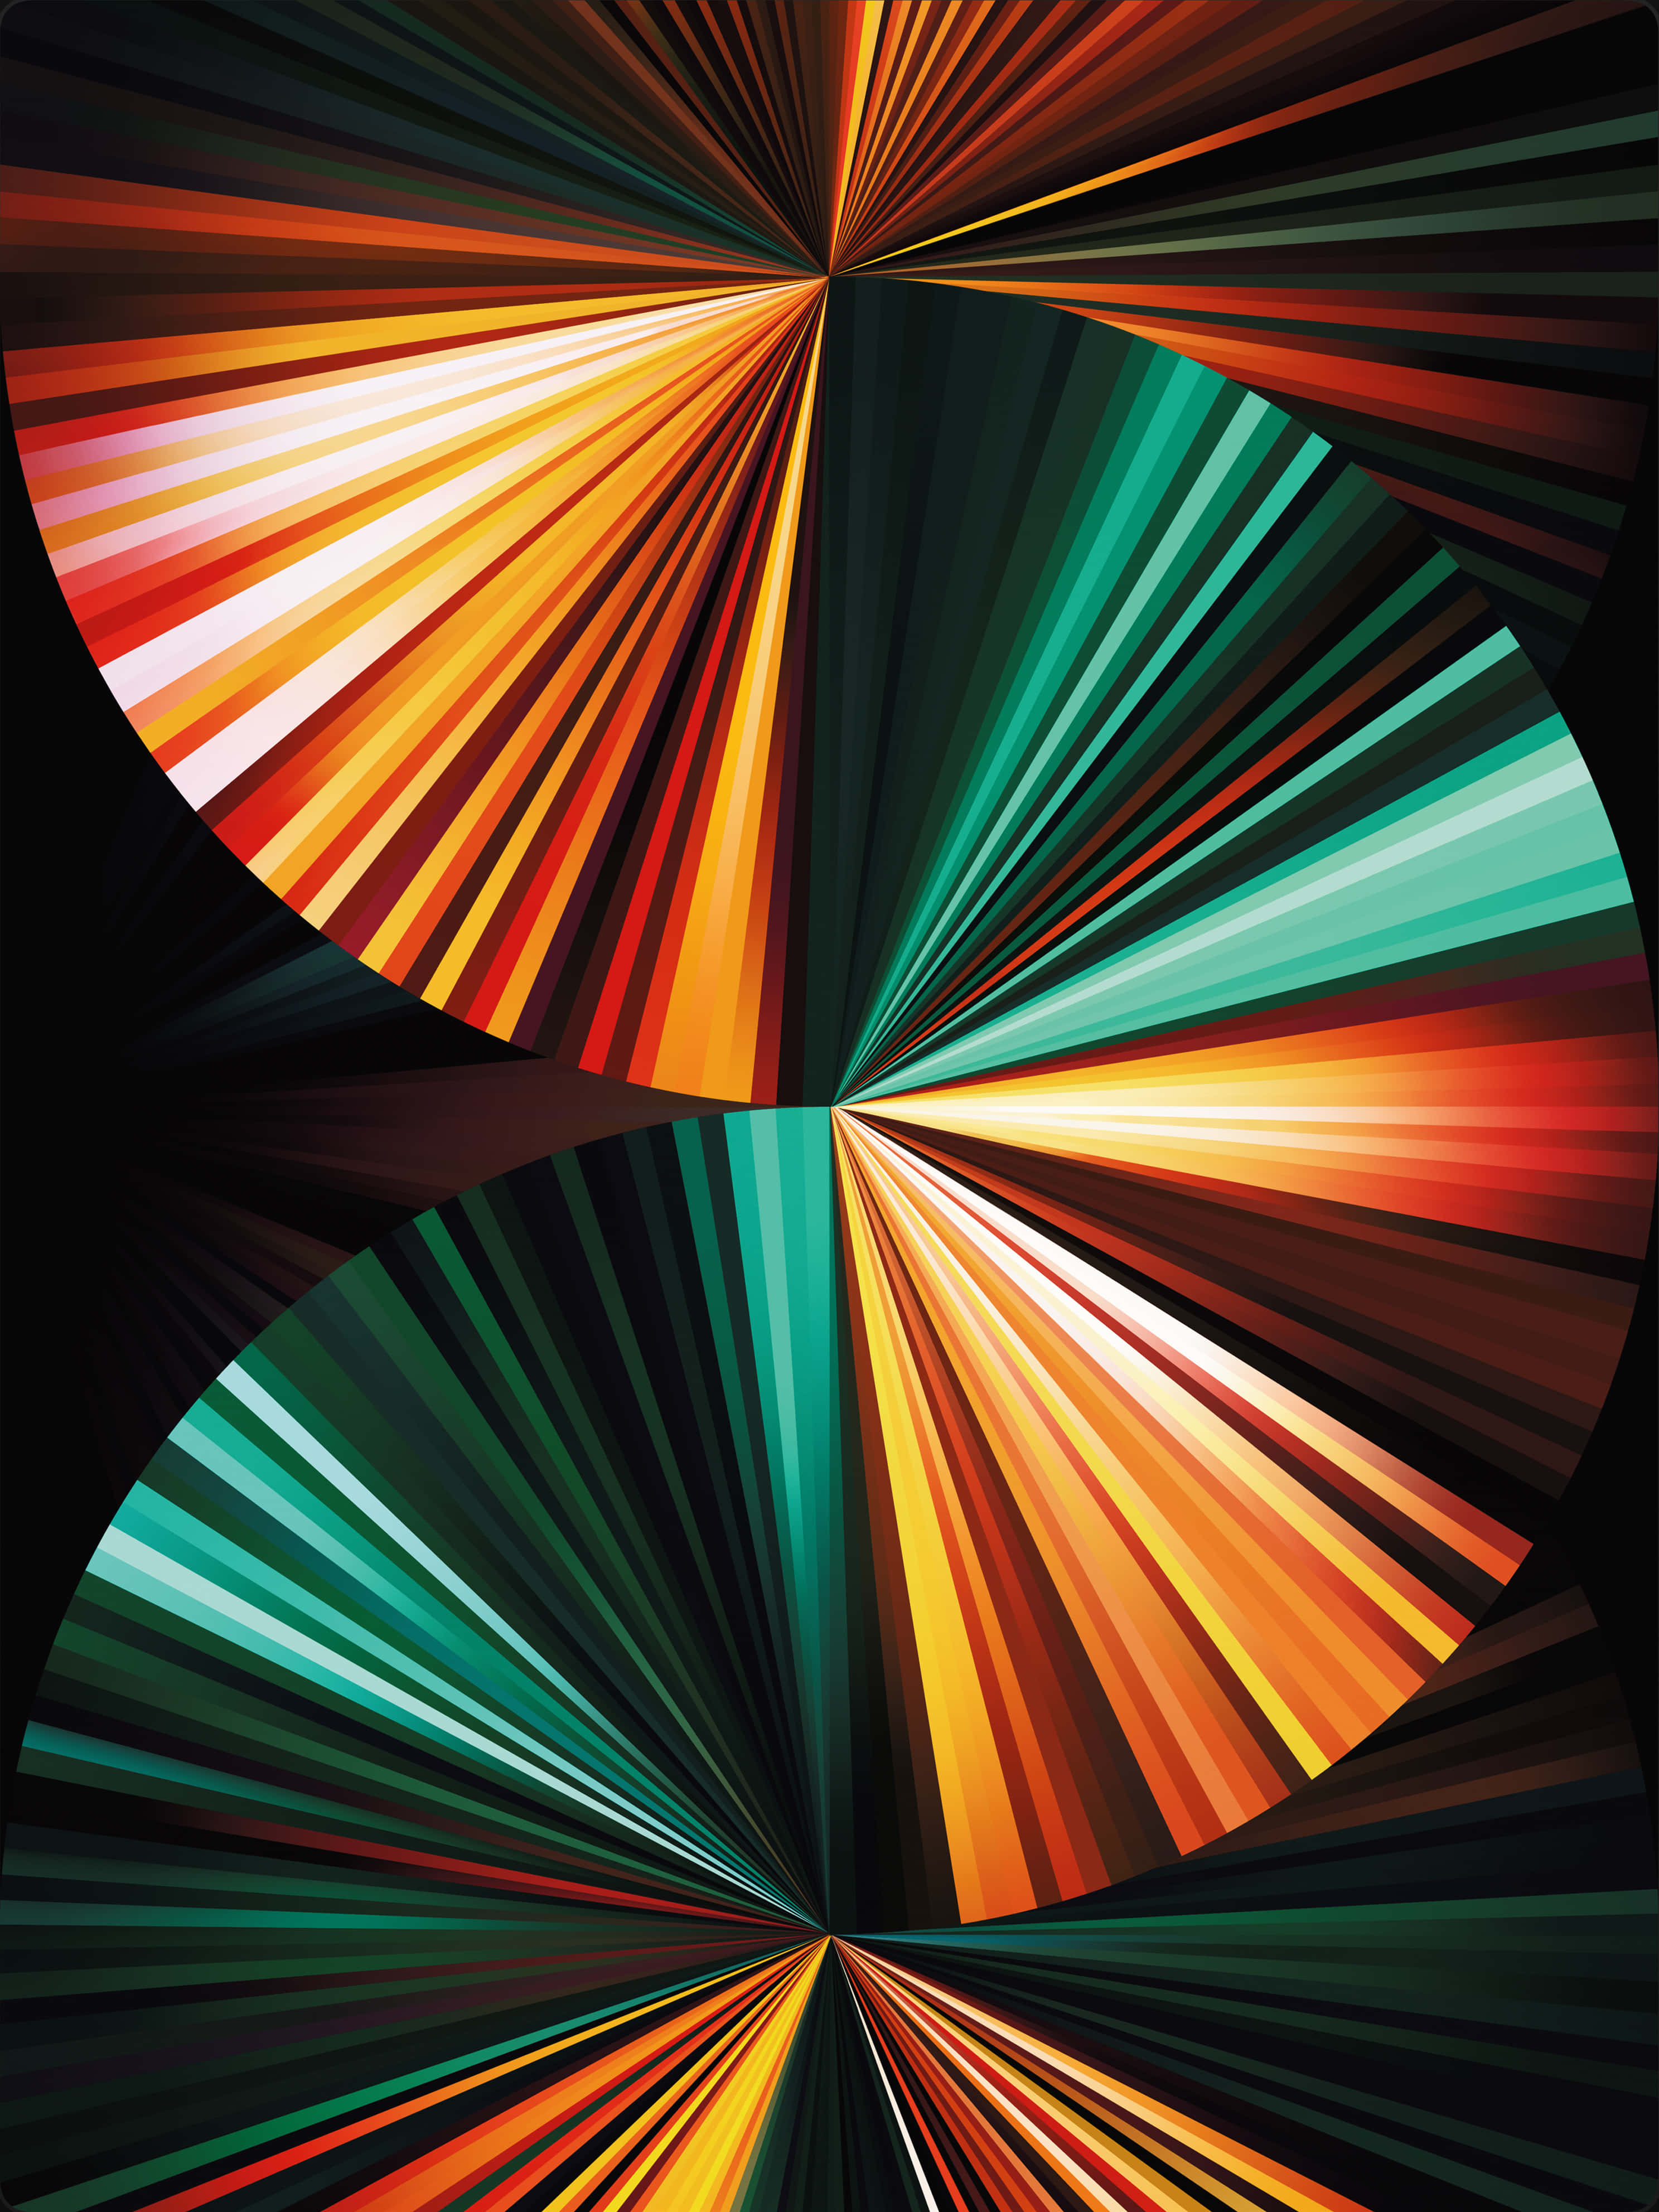 A Colorful Abstract Design Wallpaper